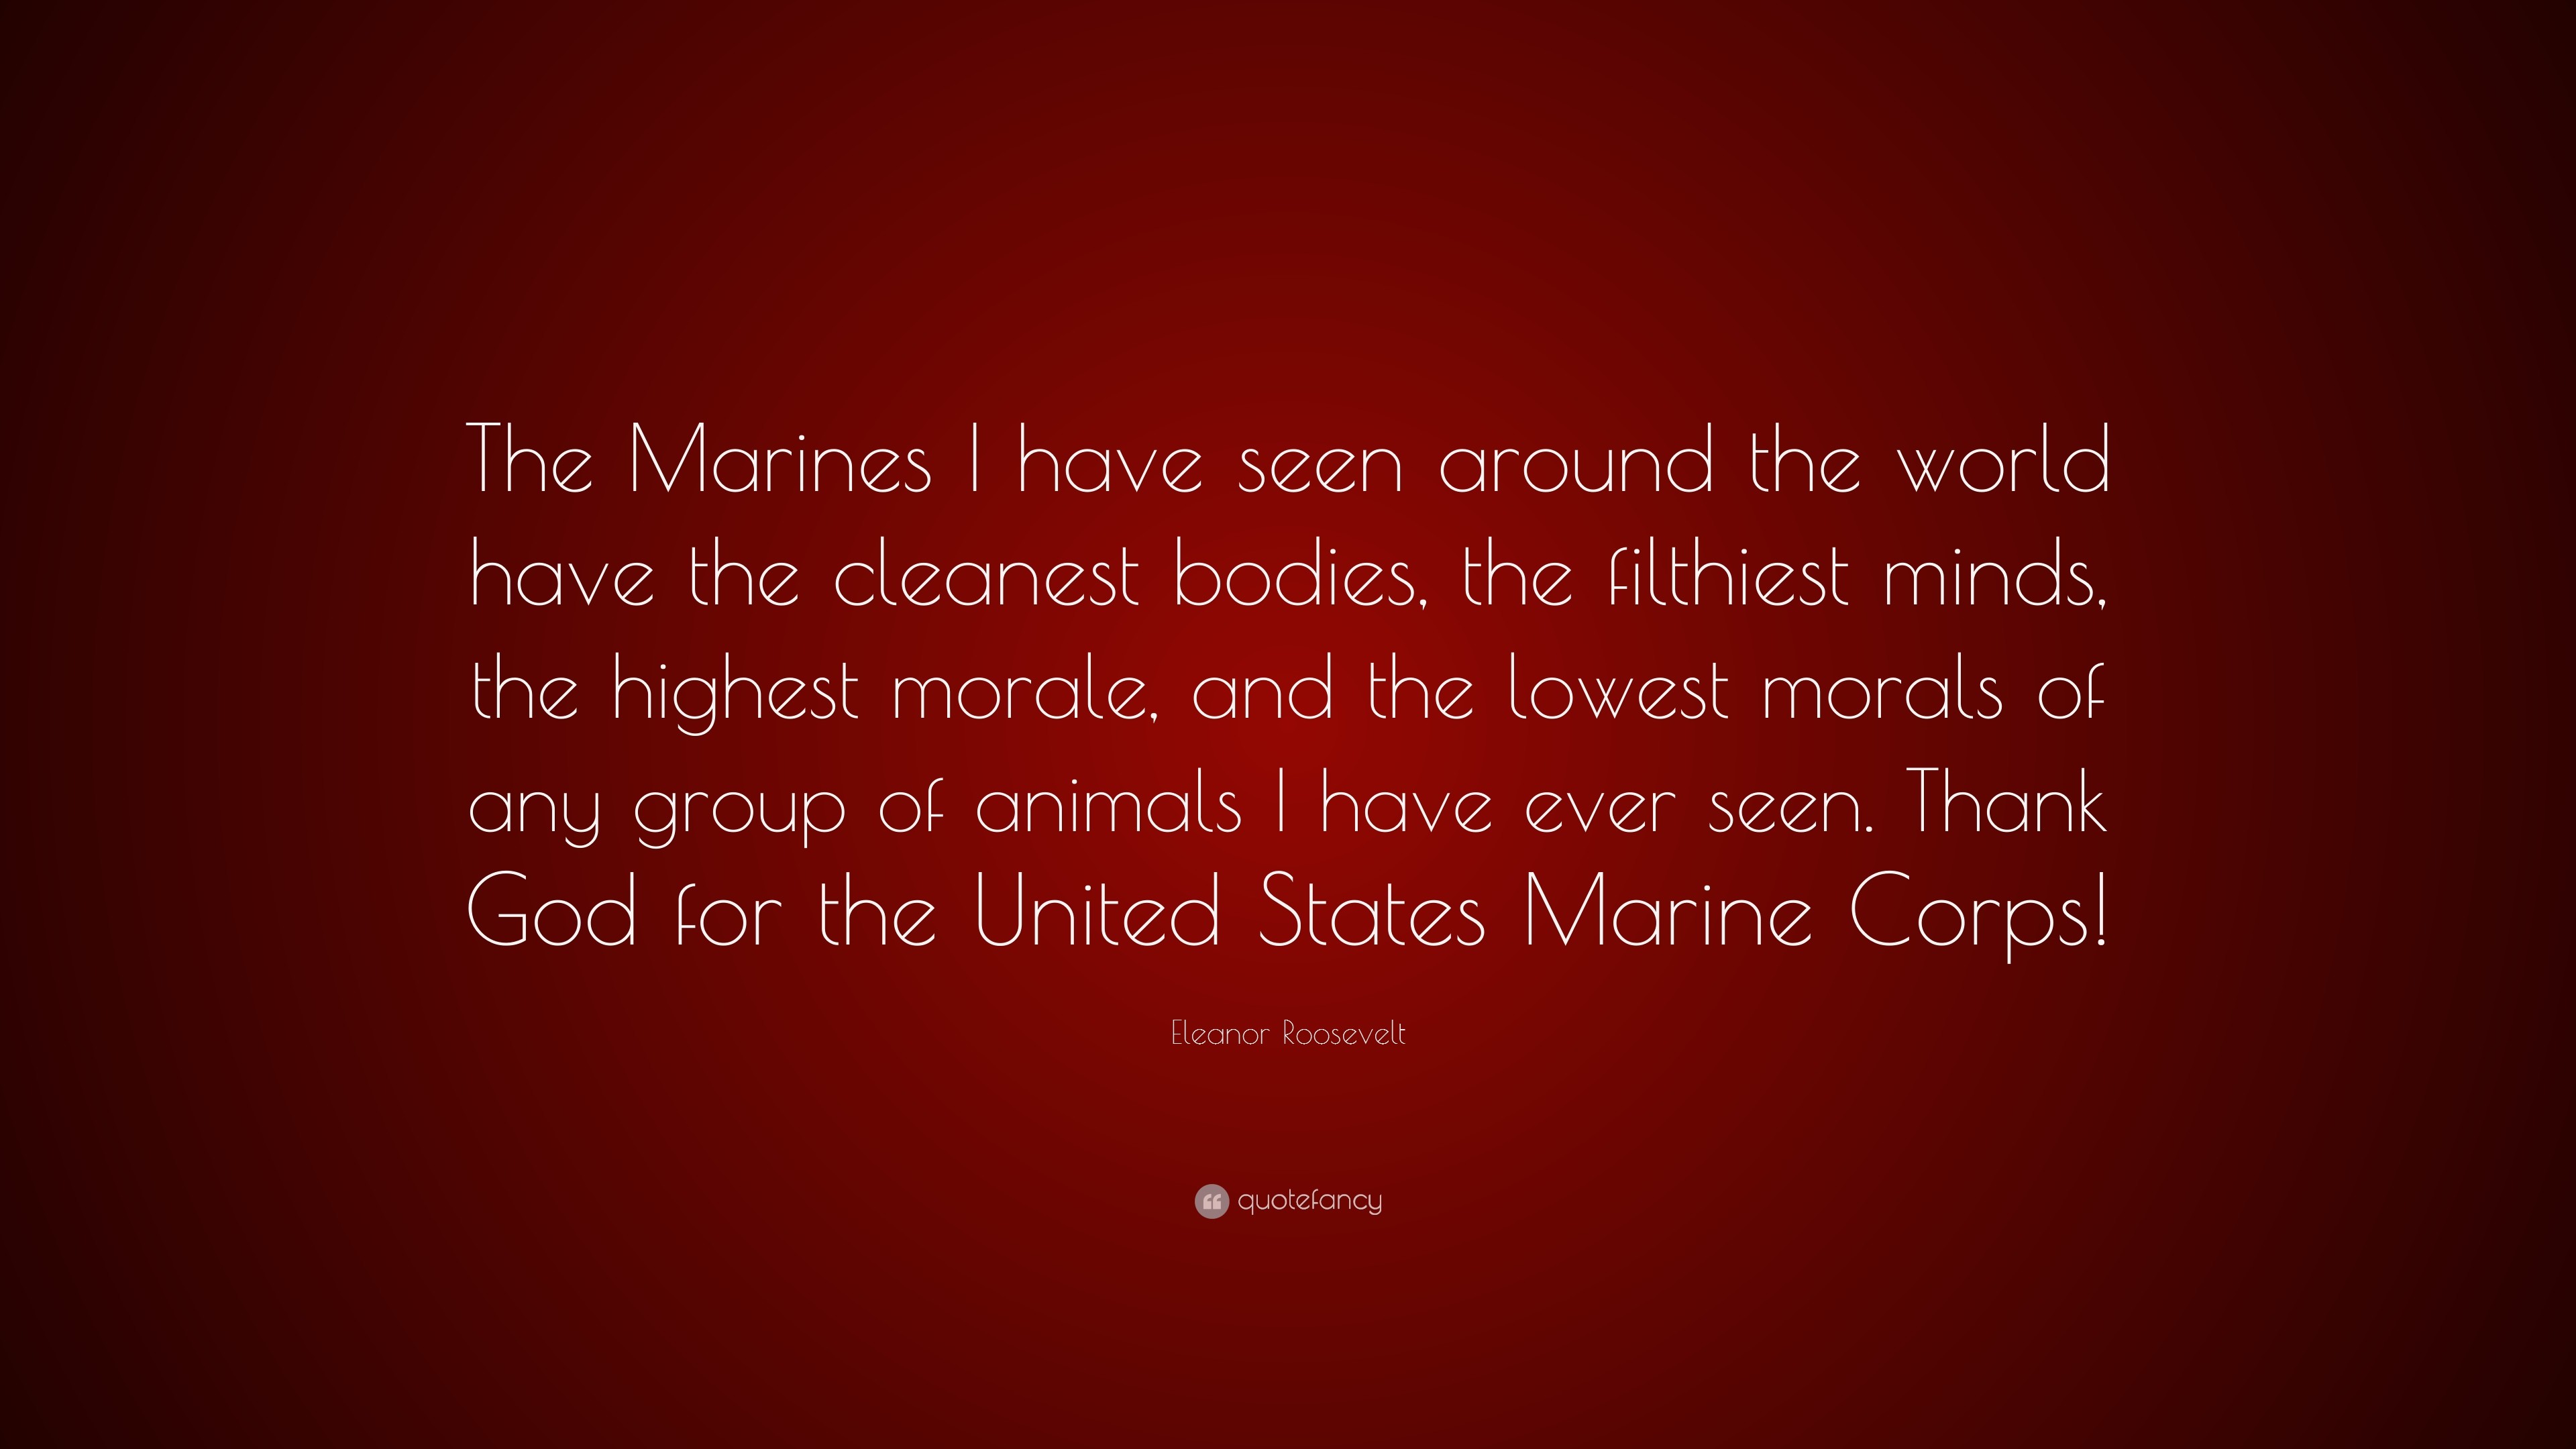 Eleanor Roosevelt Quote The Marines I have seen around the world have the cleanest